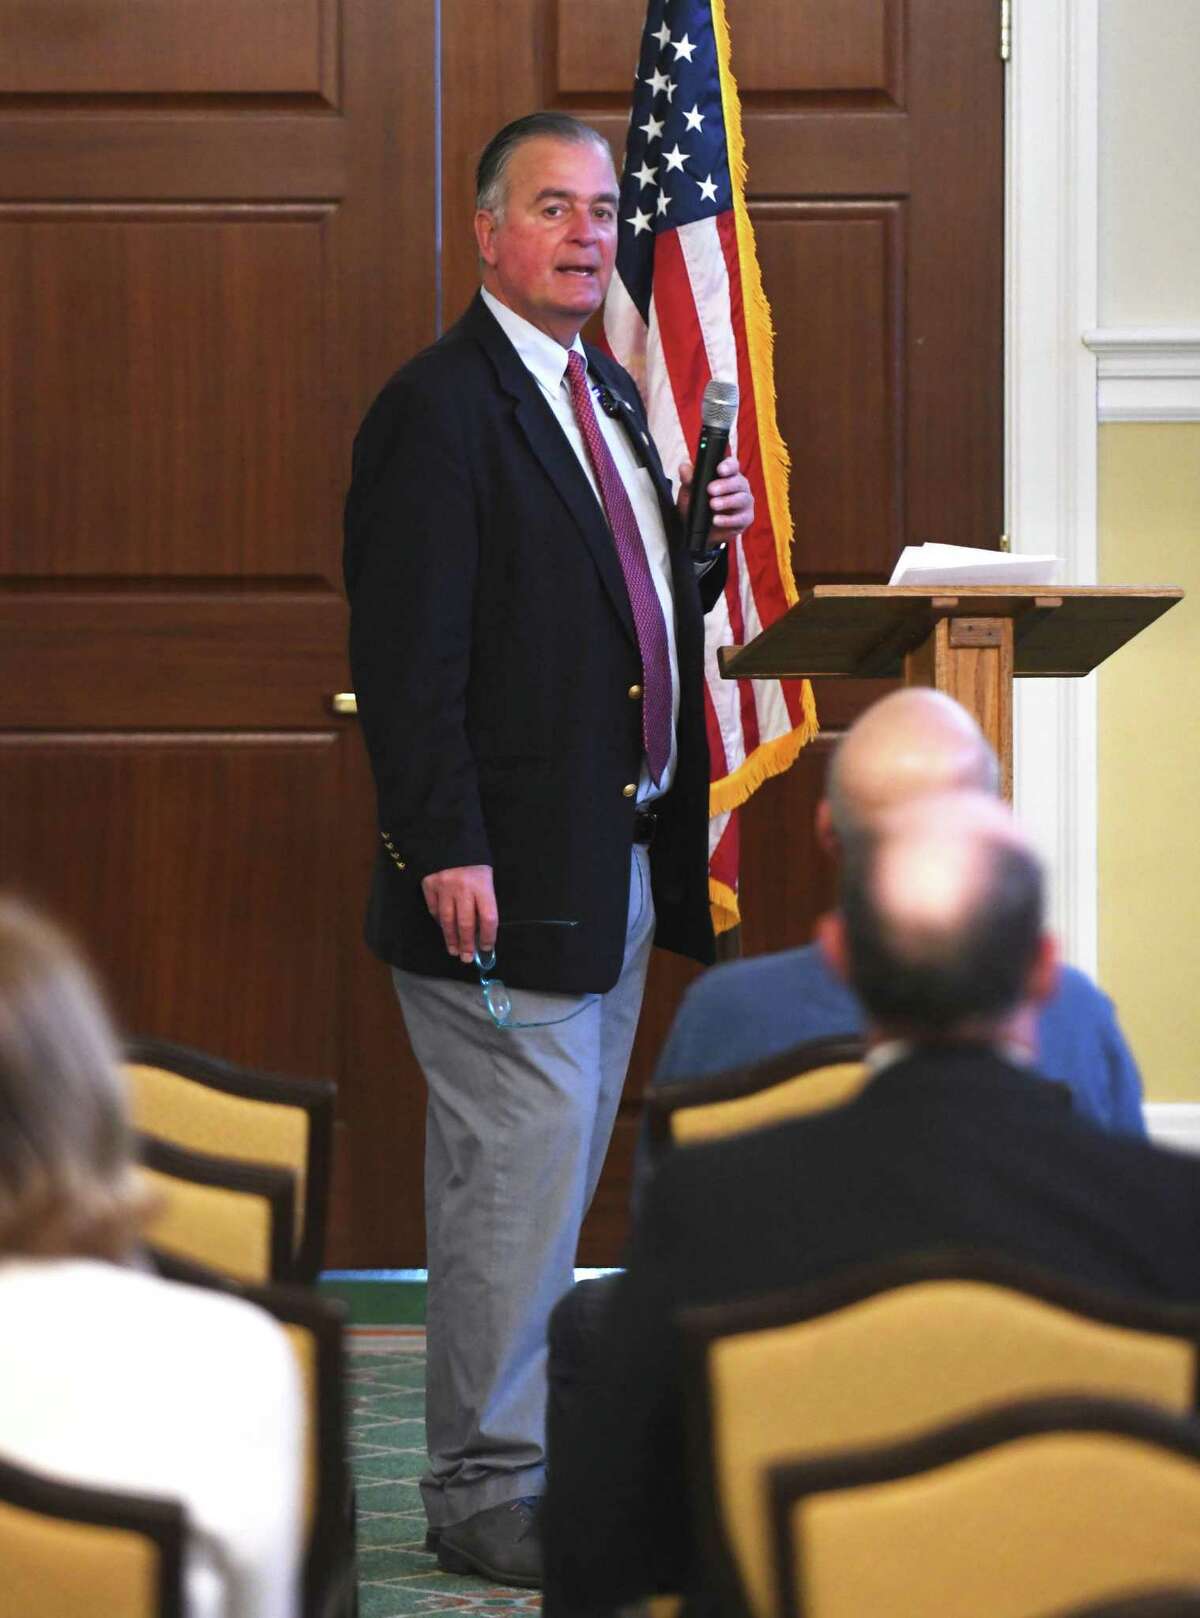 State Rep. Steve Meskers, D-Greenwich, speaks during the Retired Men's Association of Greenwich weekly speaker series at First Presbyterian Church in Greenwich, Conn. Tuesday, Feb. 16, 2022. Meskers, who represents District 150 of the Connecticut General Assembly, spoke on the topic of “Economic Development in Post-COVID Connecticut."